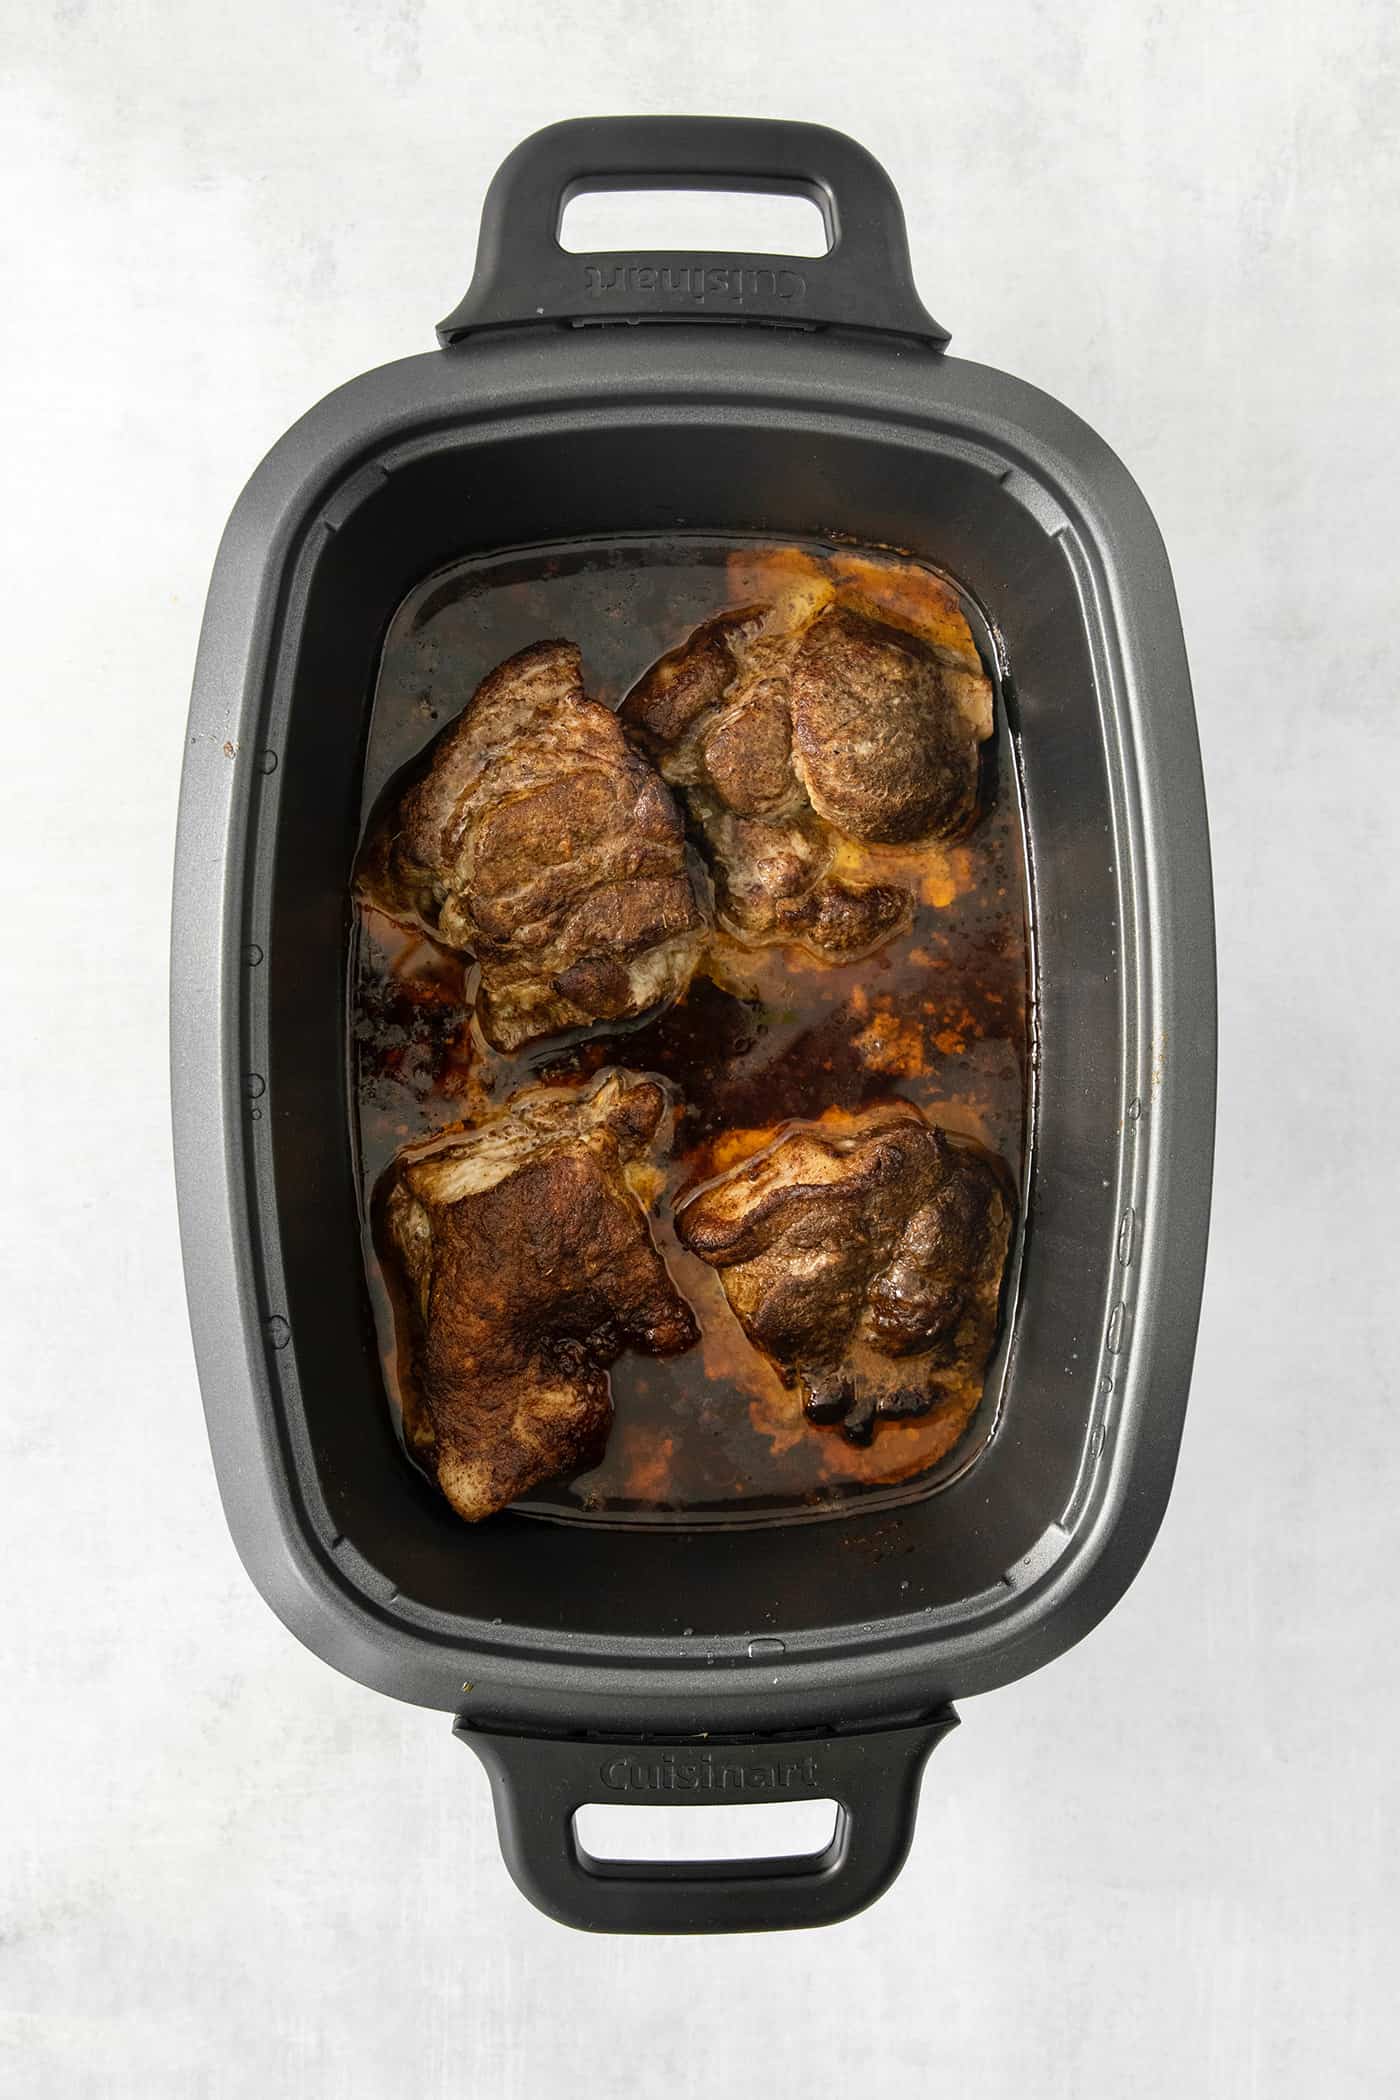 Pork cooks in a slow cooker.